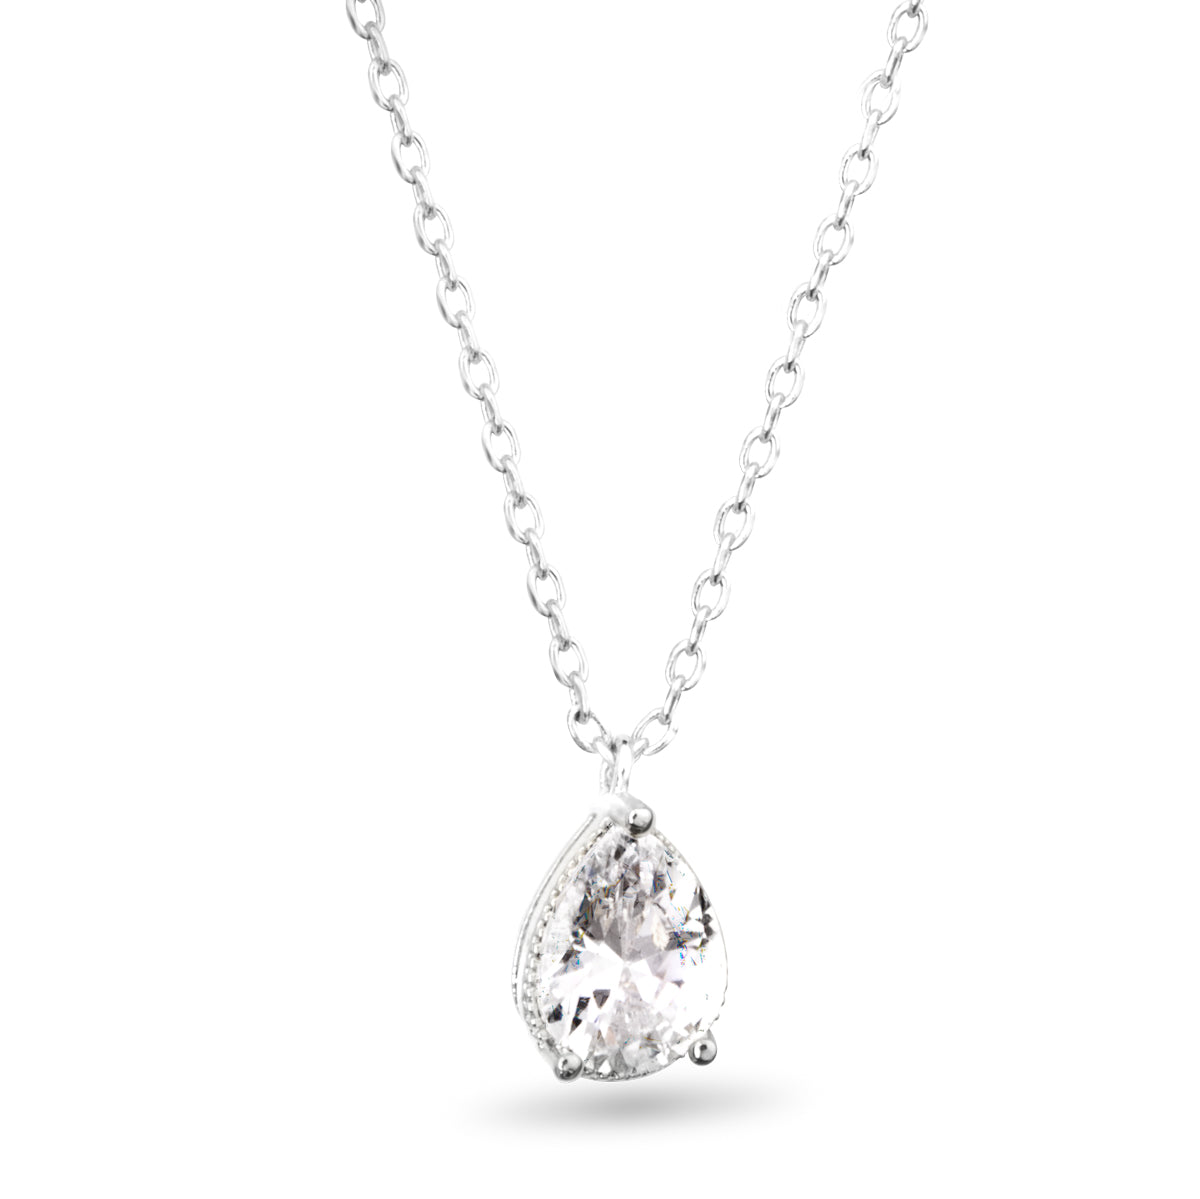 CZ Pear Shaped Solitaire Necklace - Silver